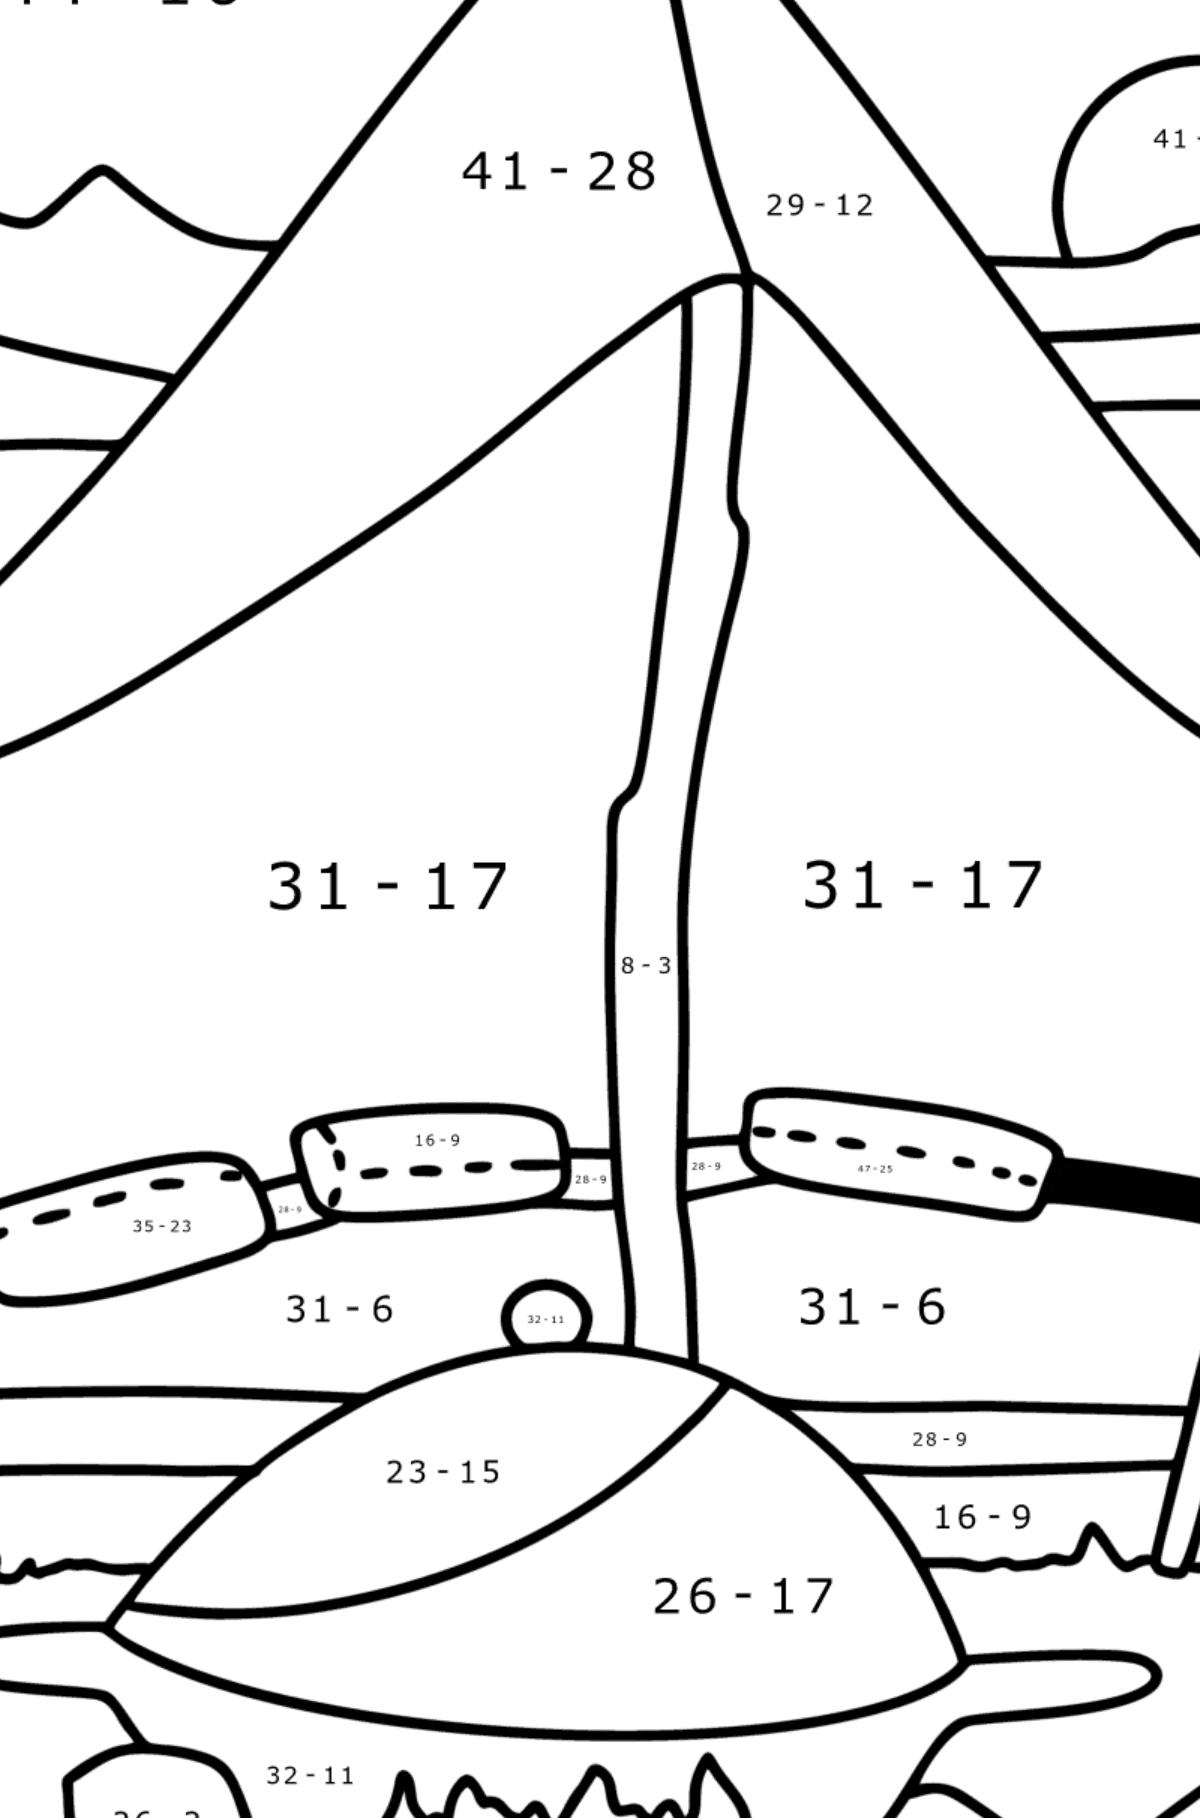 Bedouin tent coloring page - Math Coloring - Subtraction for Kids